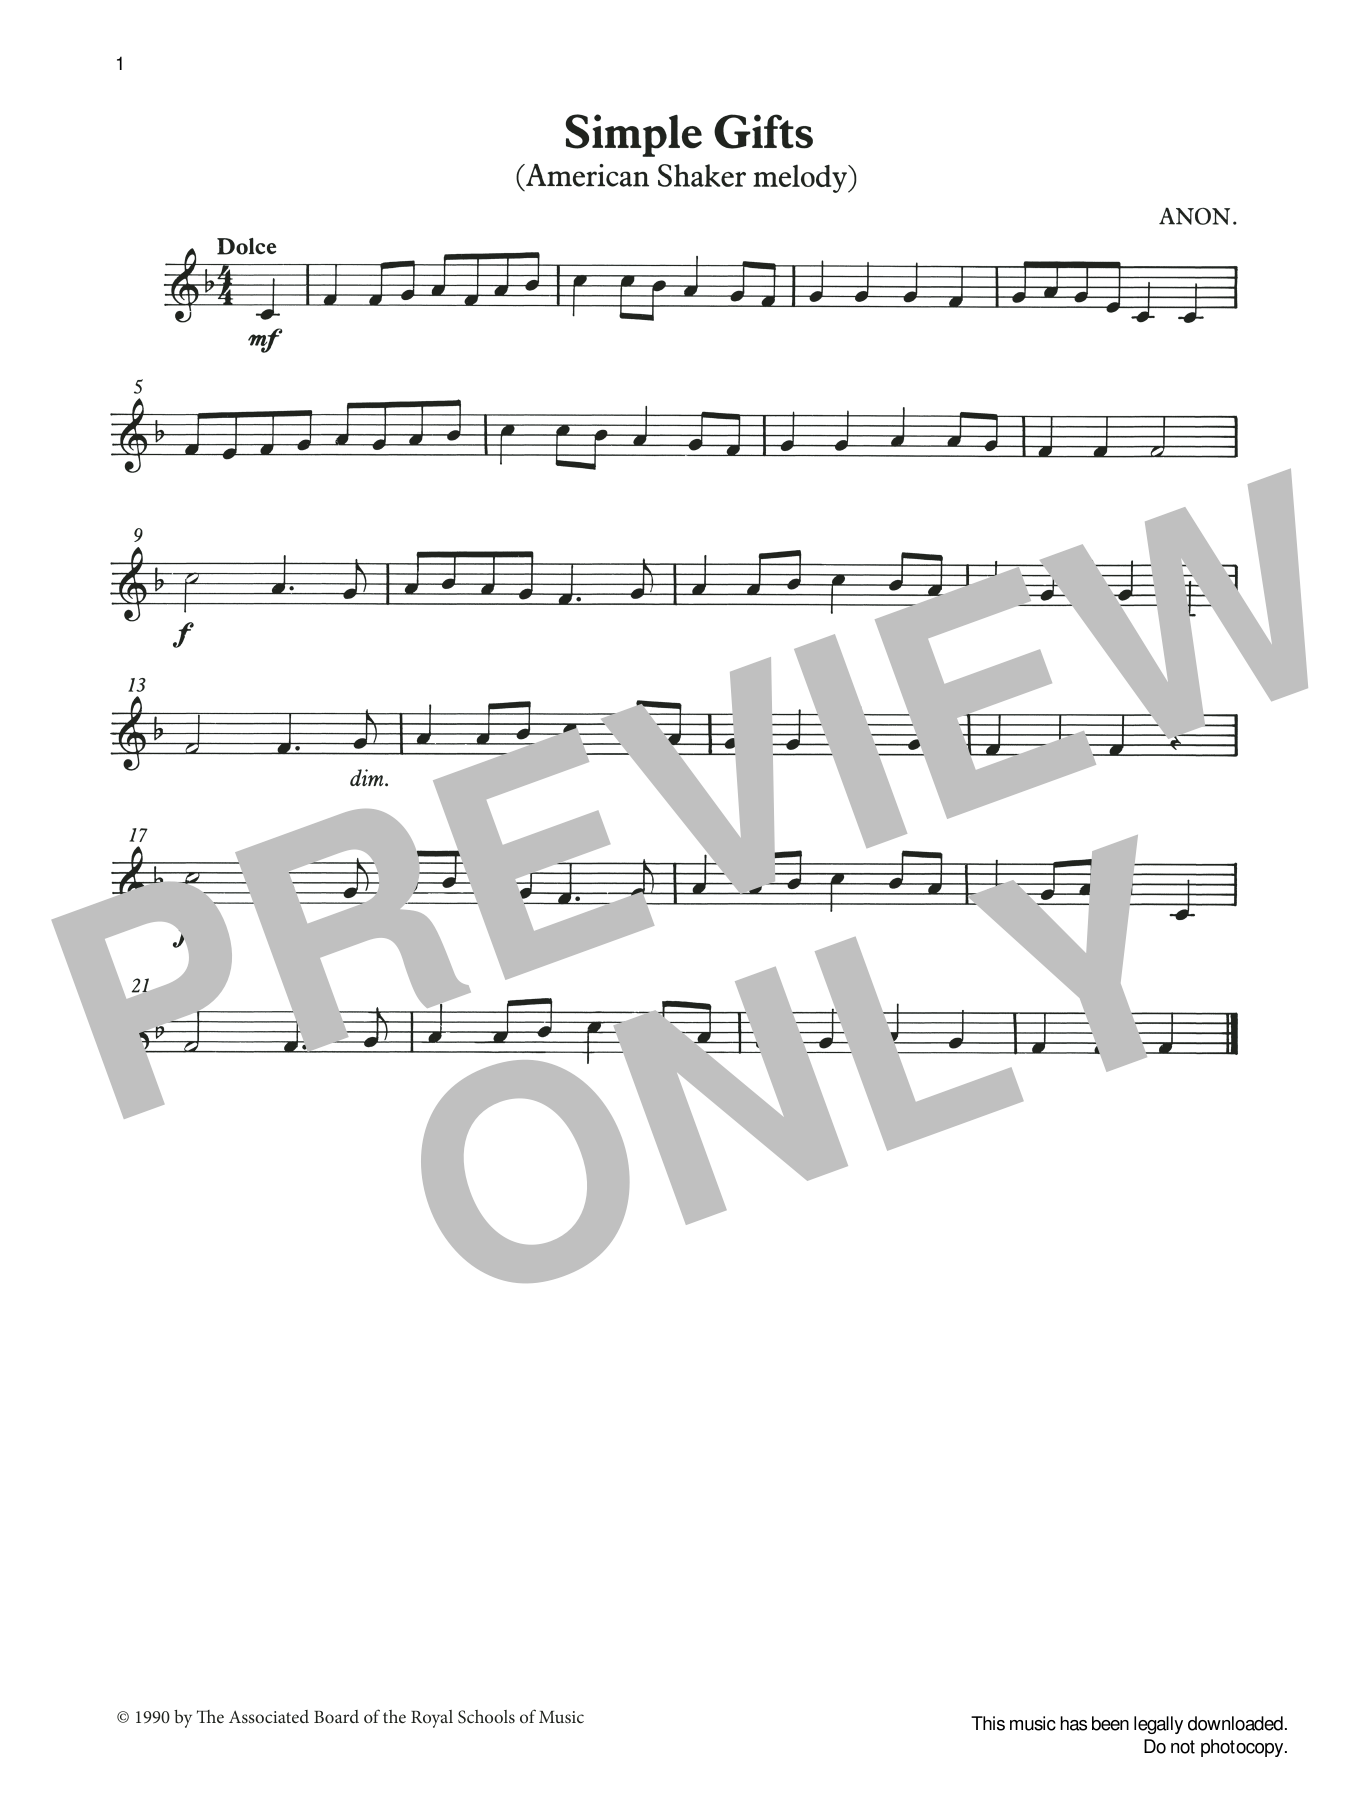 Simple Gifts from Graded Music for Tuned Percussion, Book I (Percussion Solo) von Aaron Copland